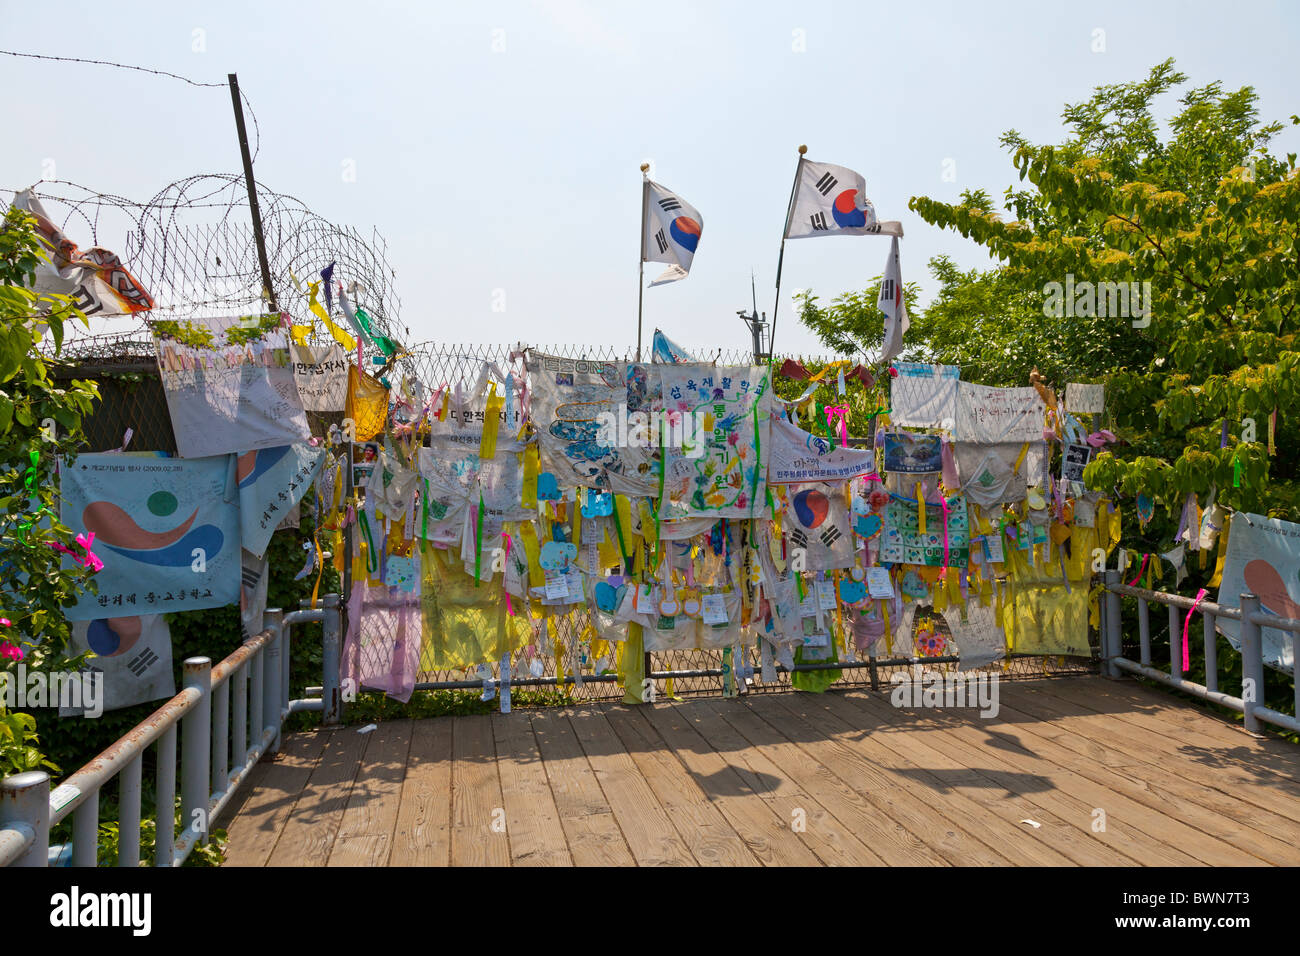 Barrier with reunification messages on Freedom Bridge, DMZ Demilitarized Zone, South Korea. JMH3825 Stock Photo